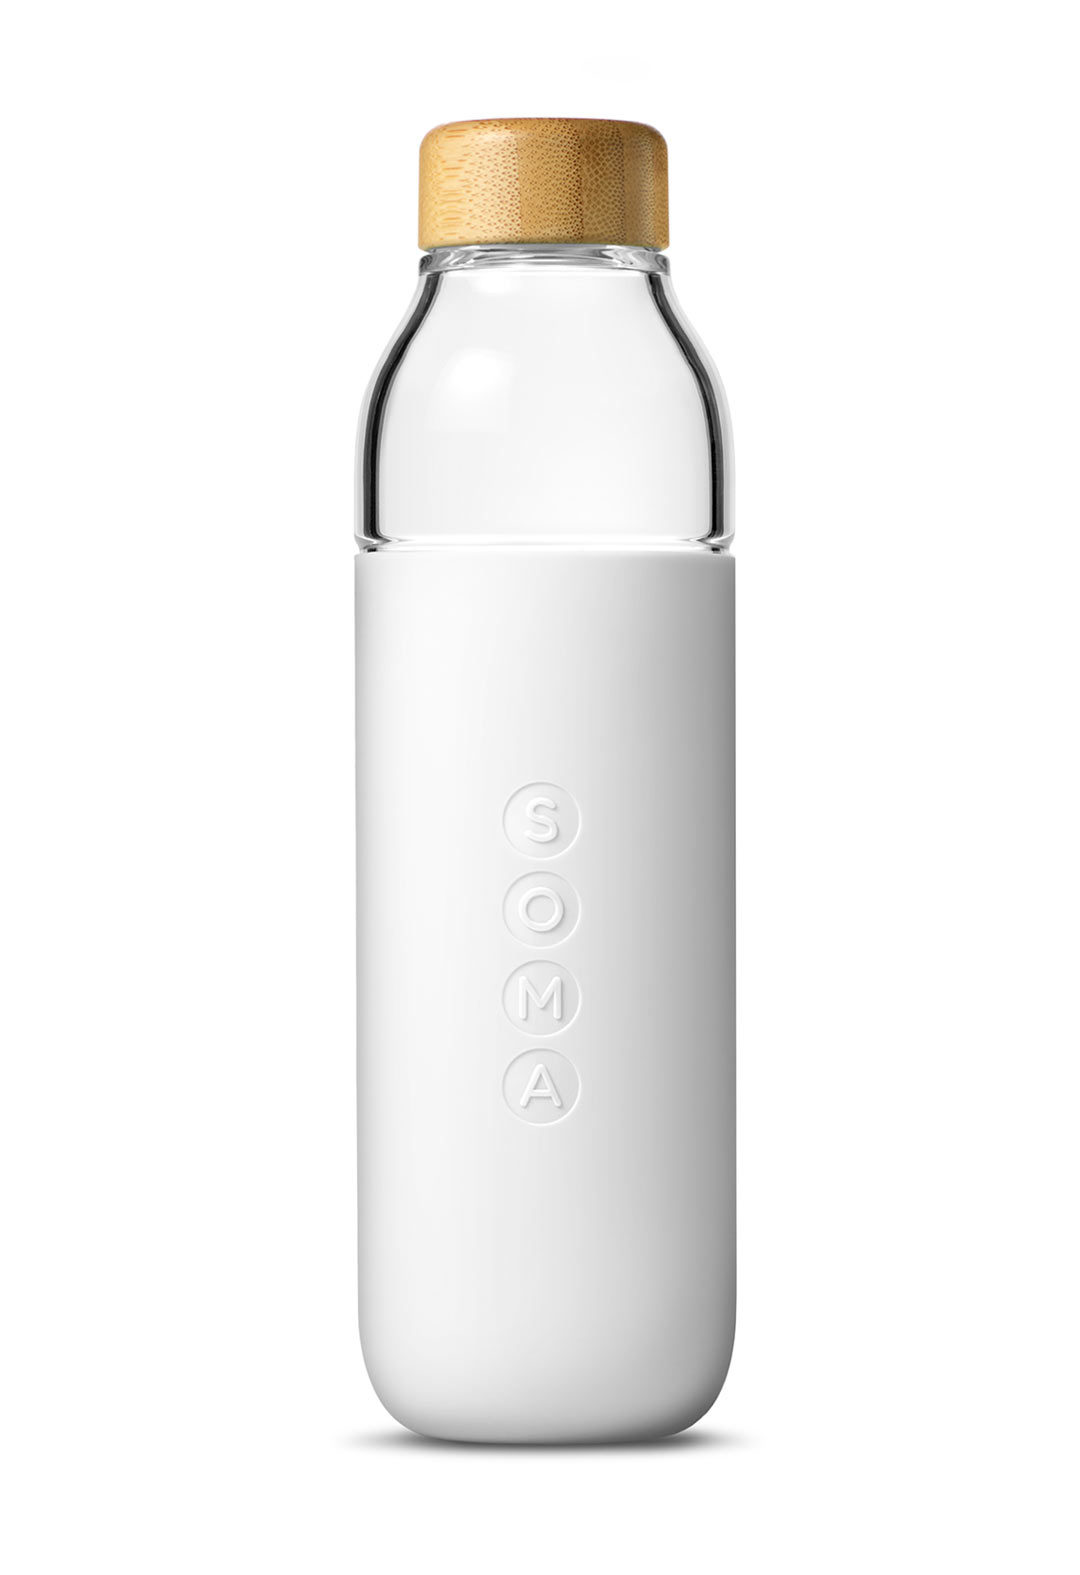 tumi-giveaway-soma-glass-water-bottles-2